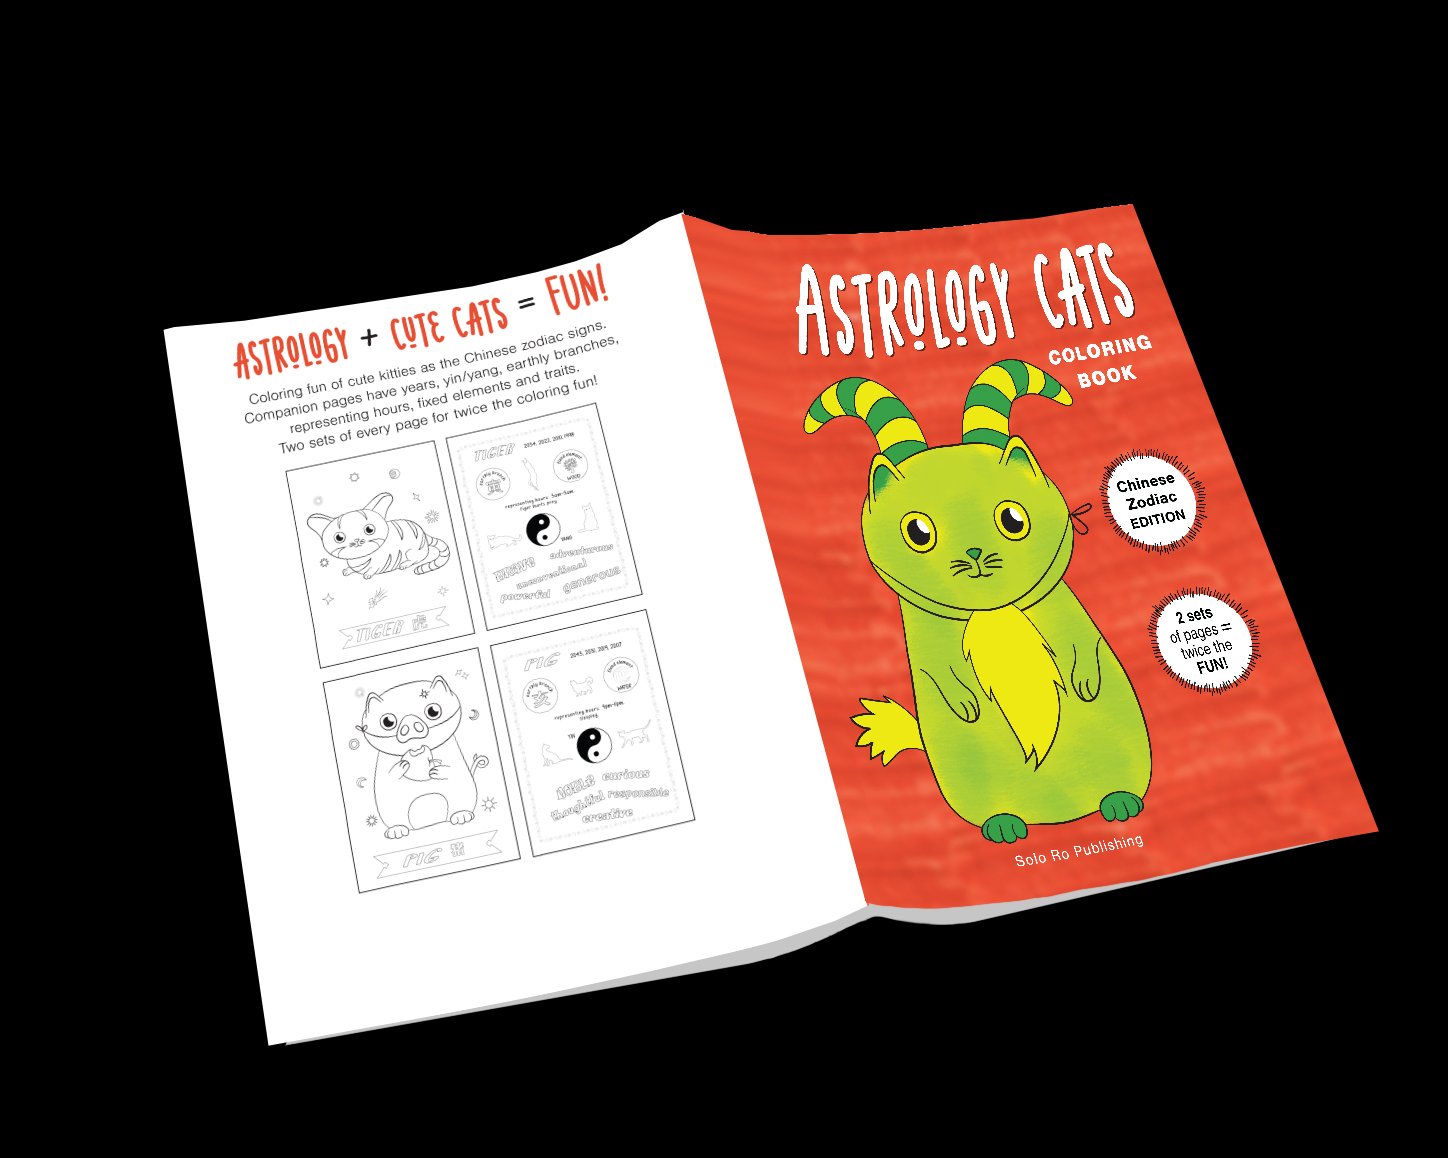 astrology cats coloring book Chinese zodiac.jpg